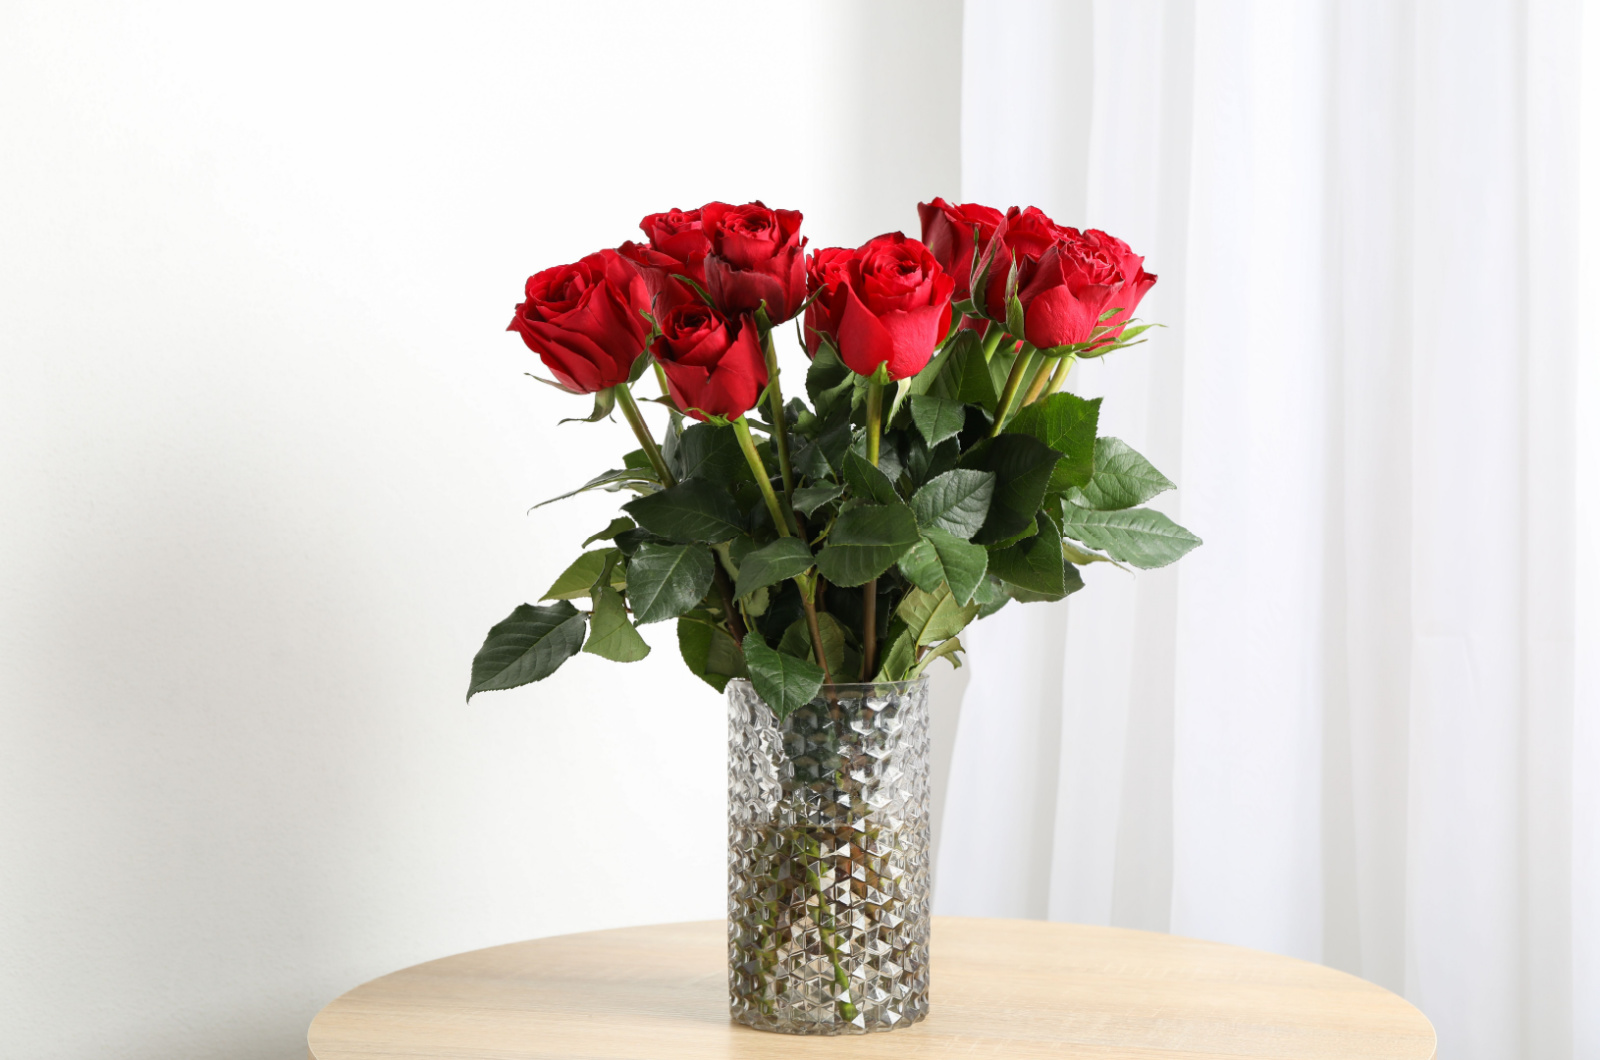 Vase with bouquet of red roses on wooden table